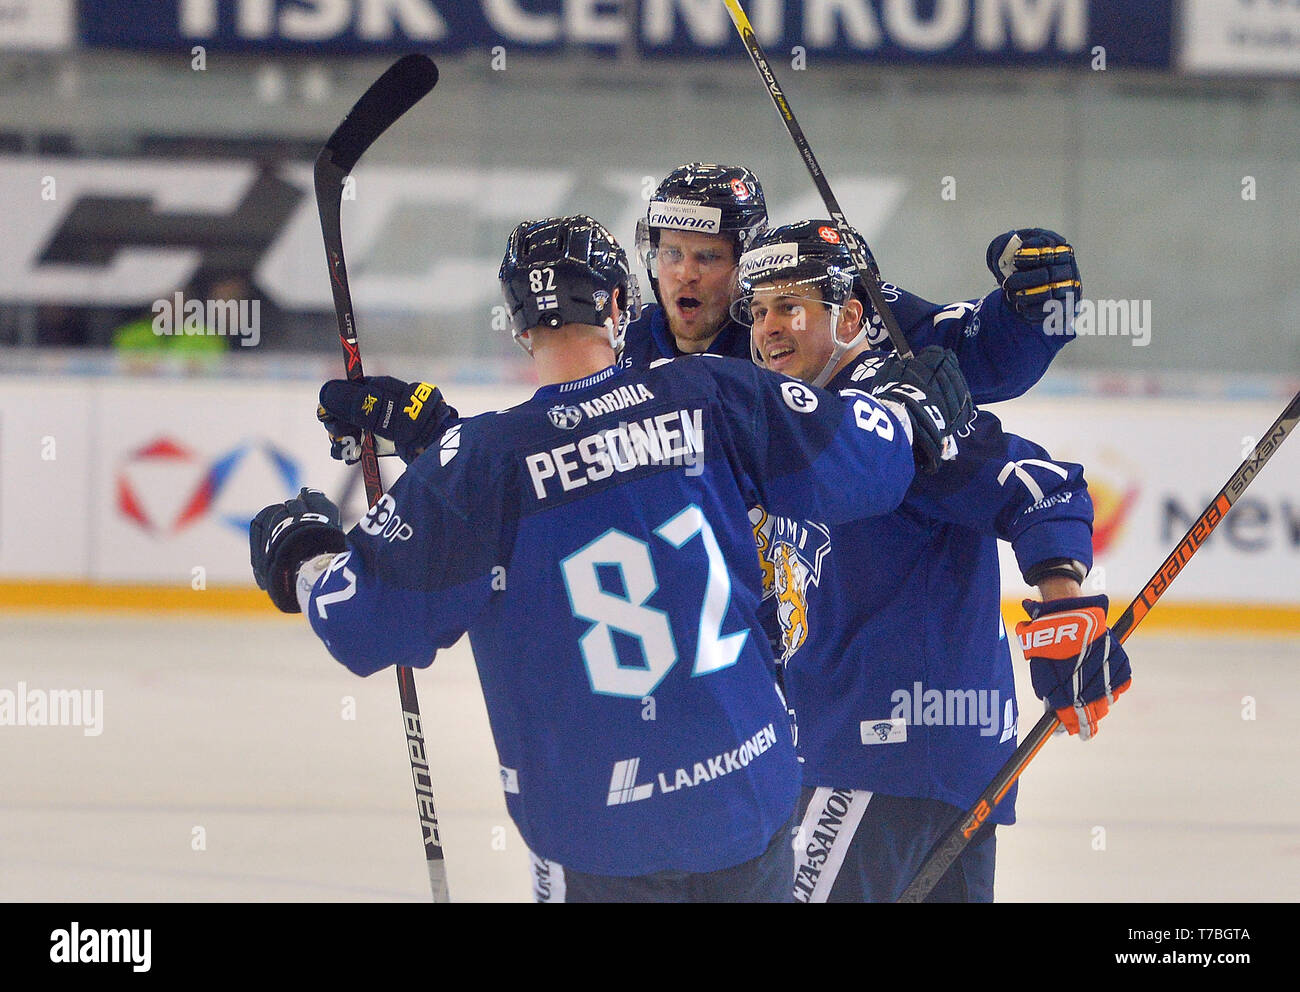 Brno, Czech Republic. 04th May, 2019. Finnish players celebrate the second goal in the Russia vs Finland match within Carlson Hockey Games tournament, part of Euro Hockey Tour in Brno, Czech Republic, May 4, 2019. Credit: Lubos Pavlicek/CTK Photo/Alamy Live News Stock Photo